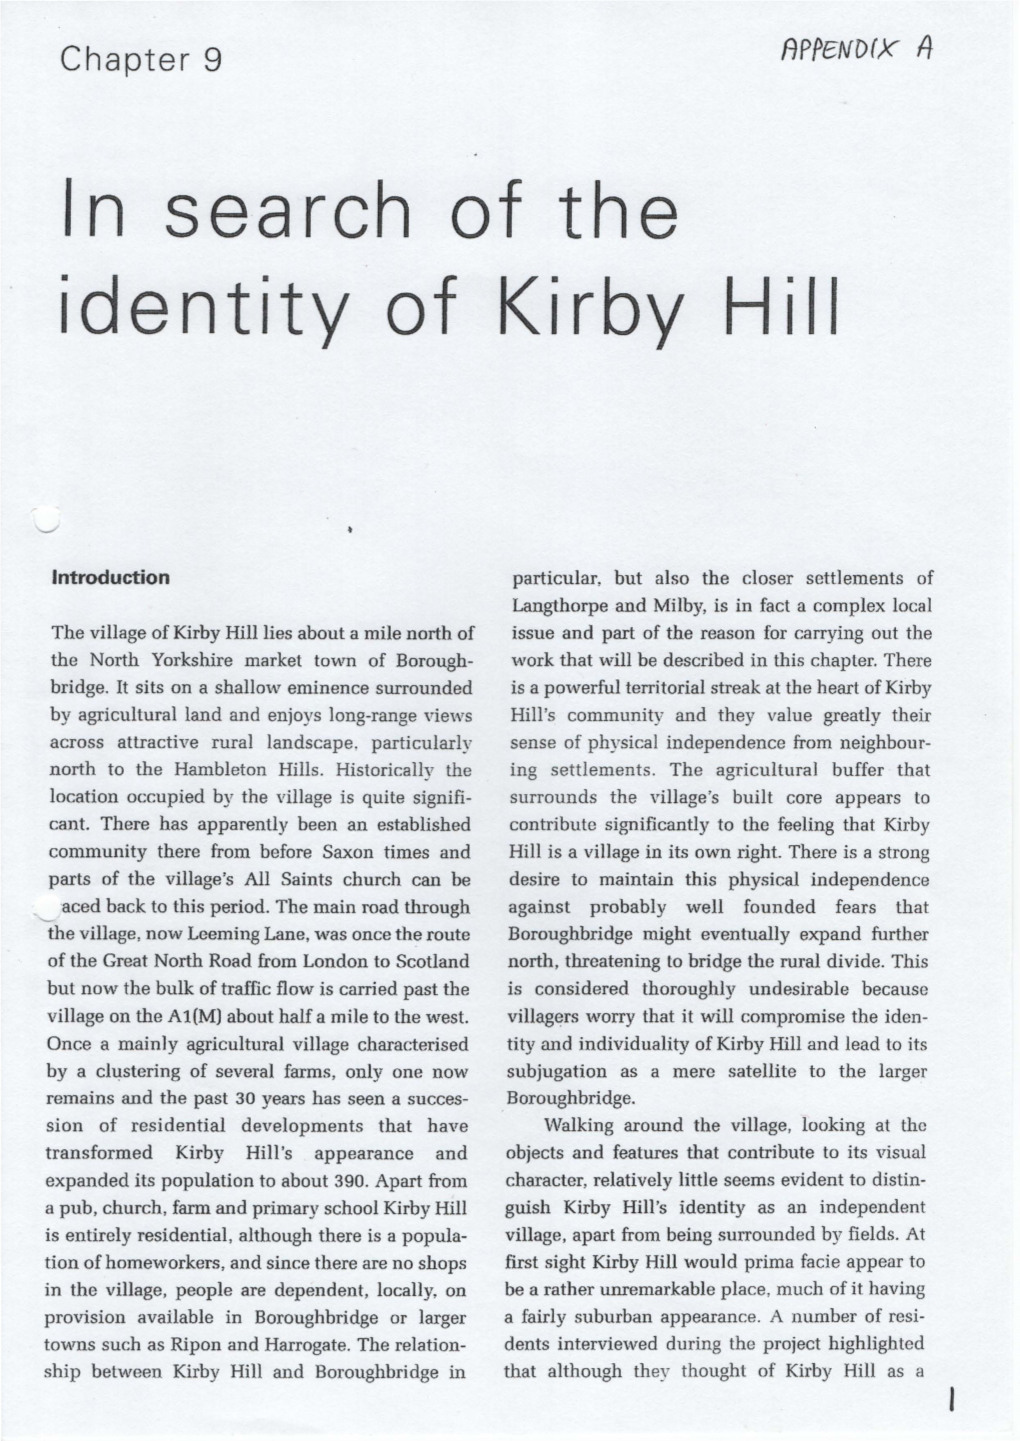 In Search of the Identity of Kirby Hill